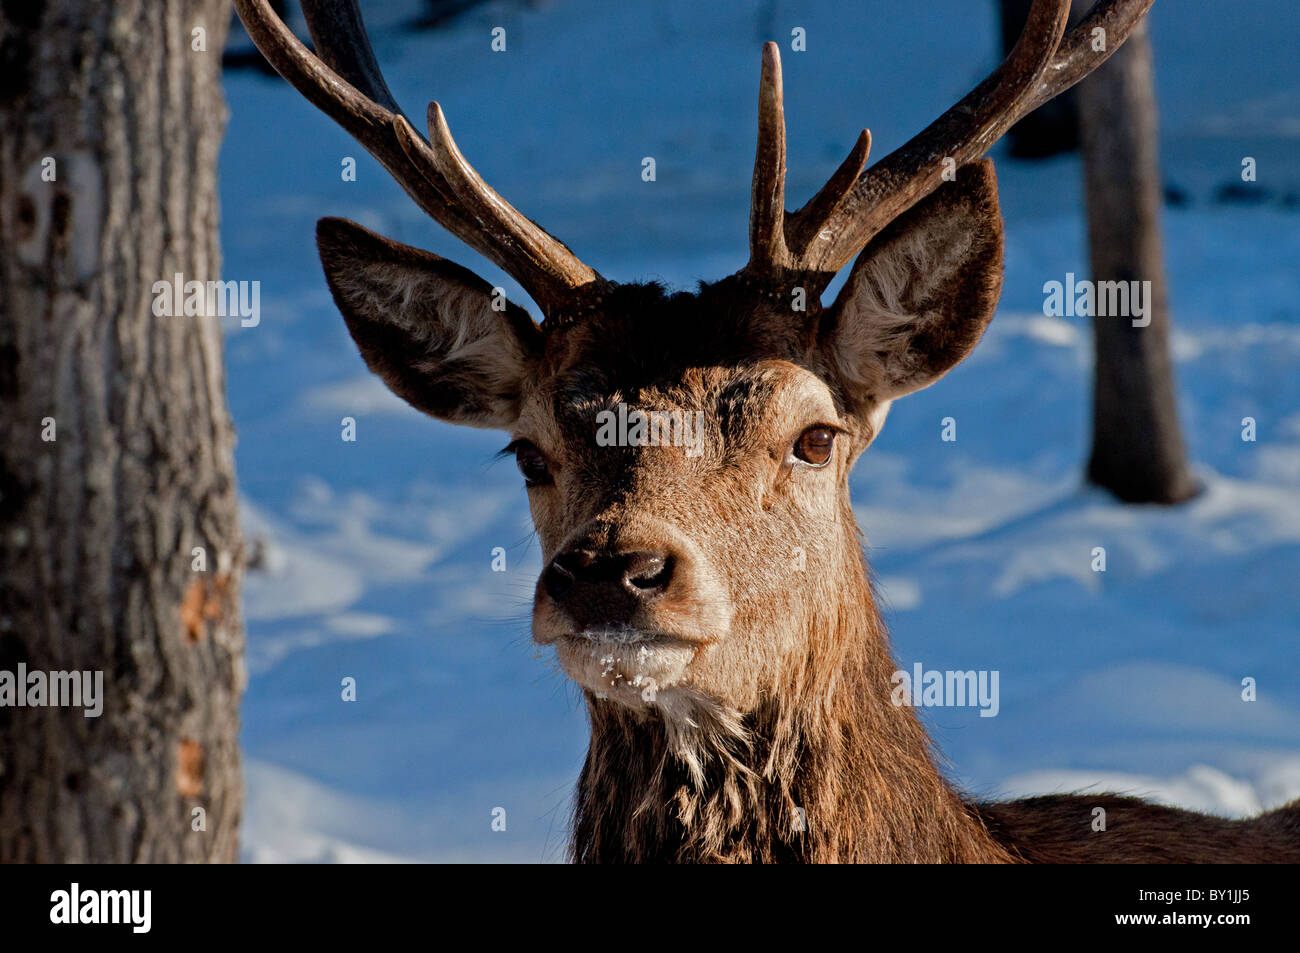 A close-up view of a male red Deer in winter Stock Photo